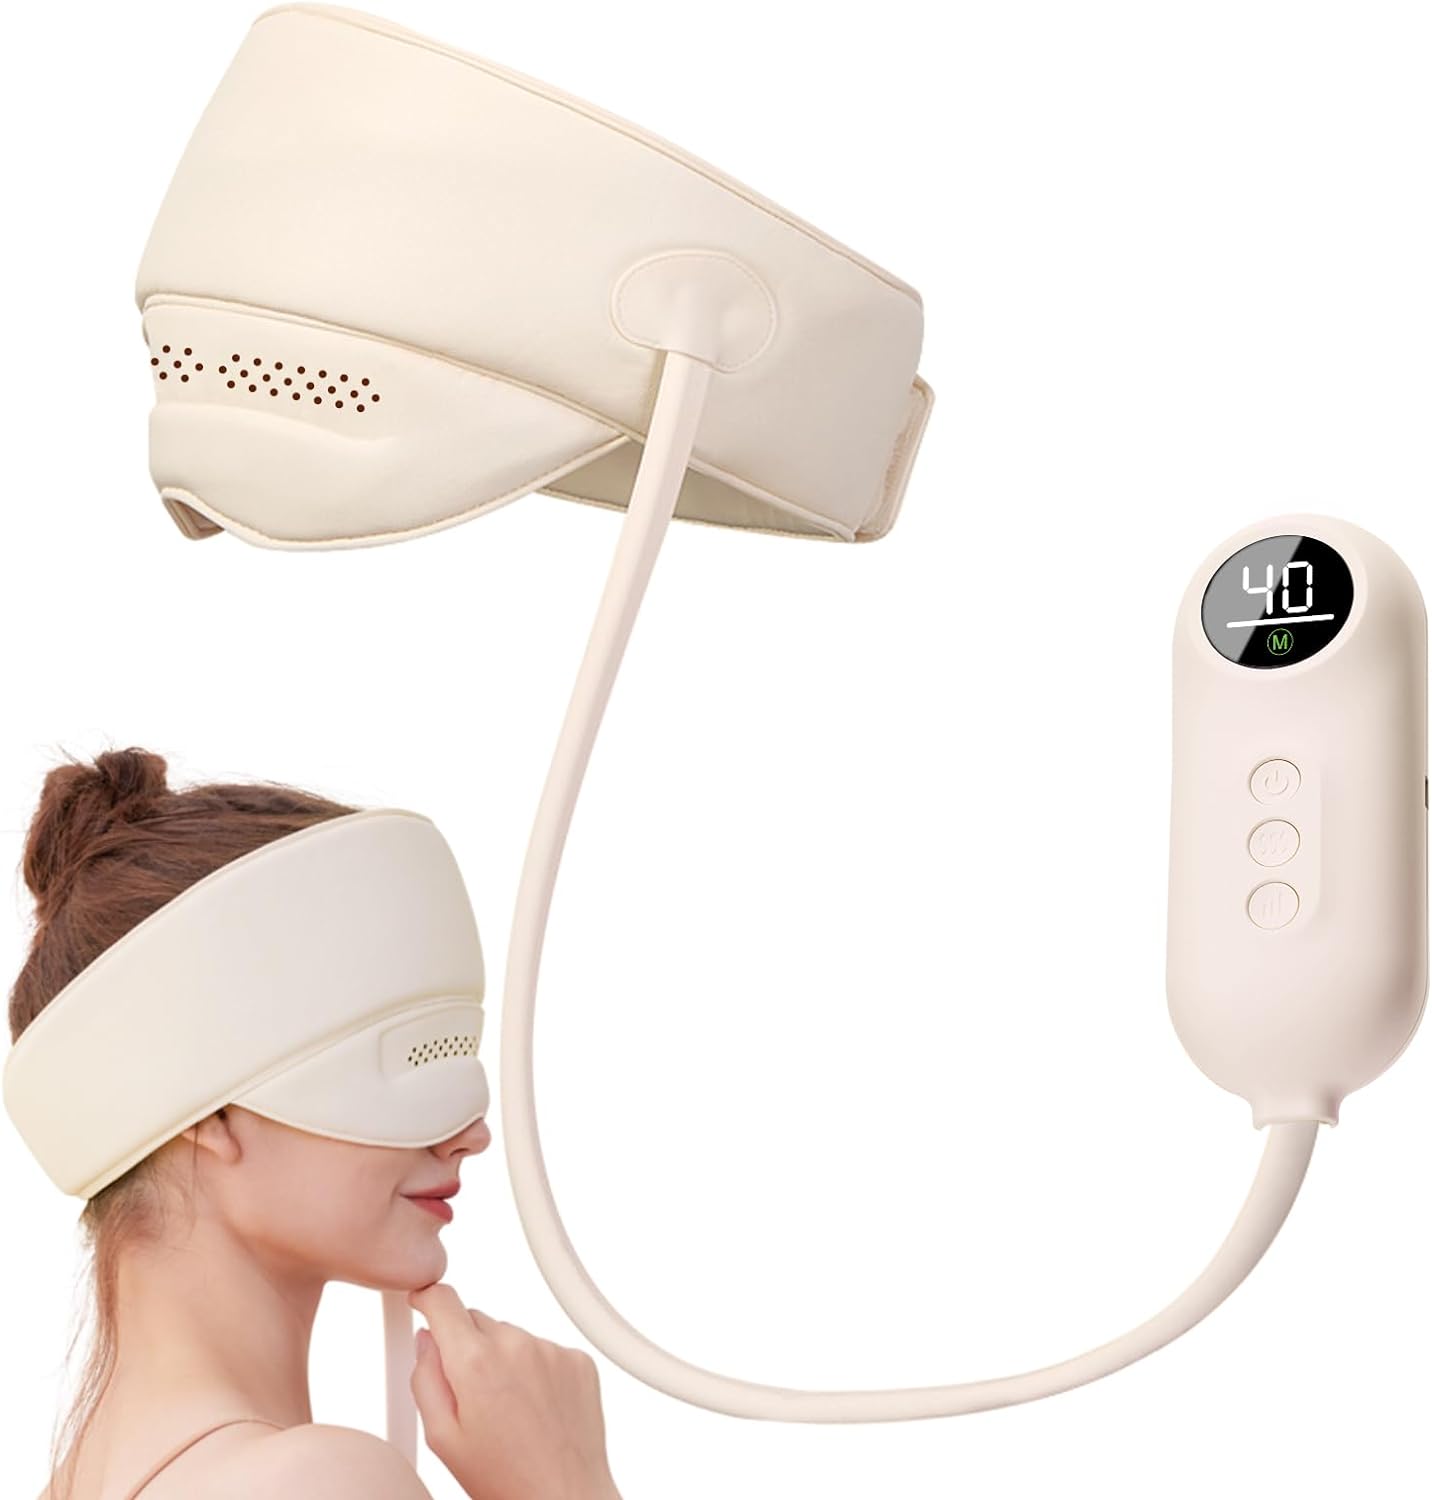 Electric Head Massager- Hotodeal Electric Scalp Massager Head Compress Air Bag Massager with Heat & Knead